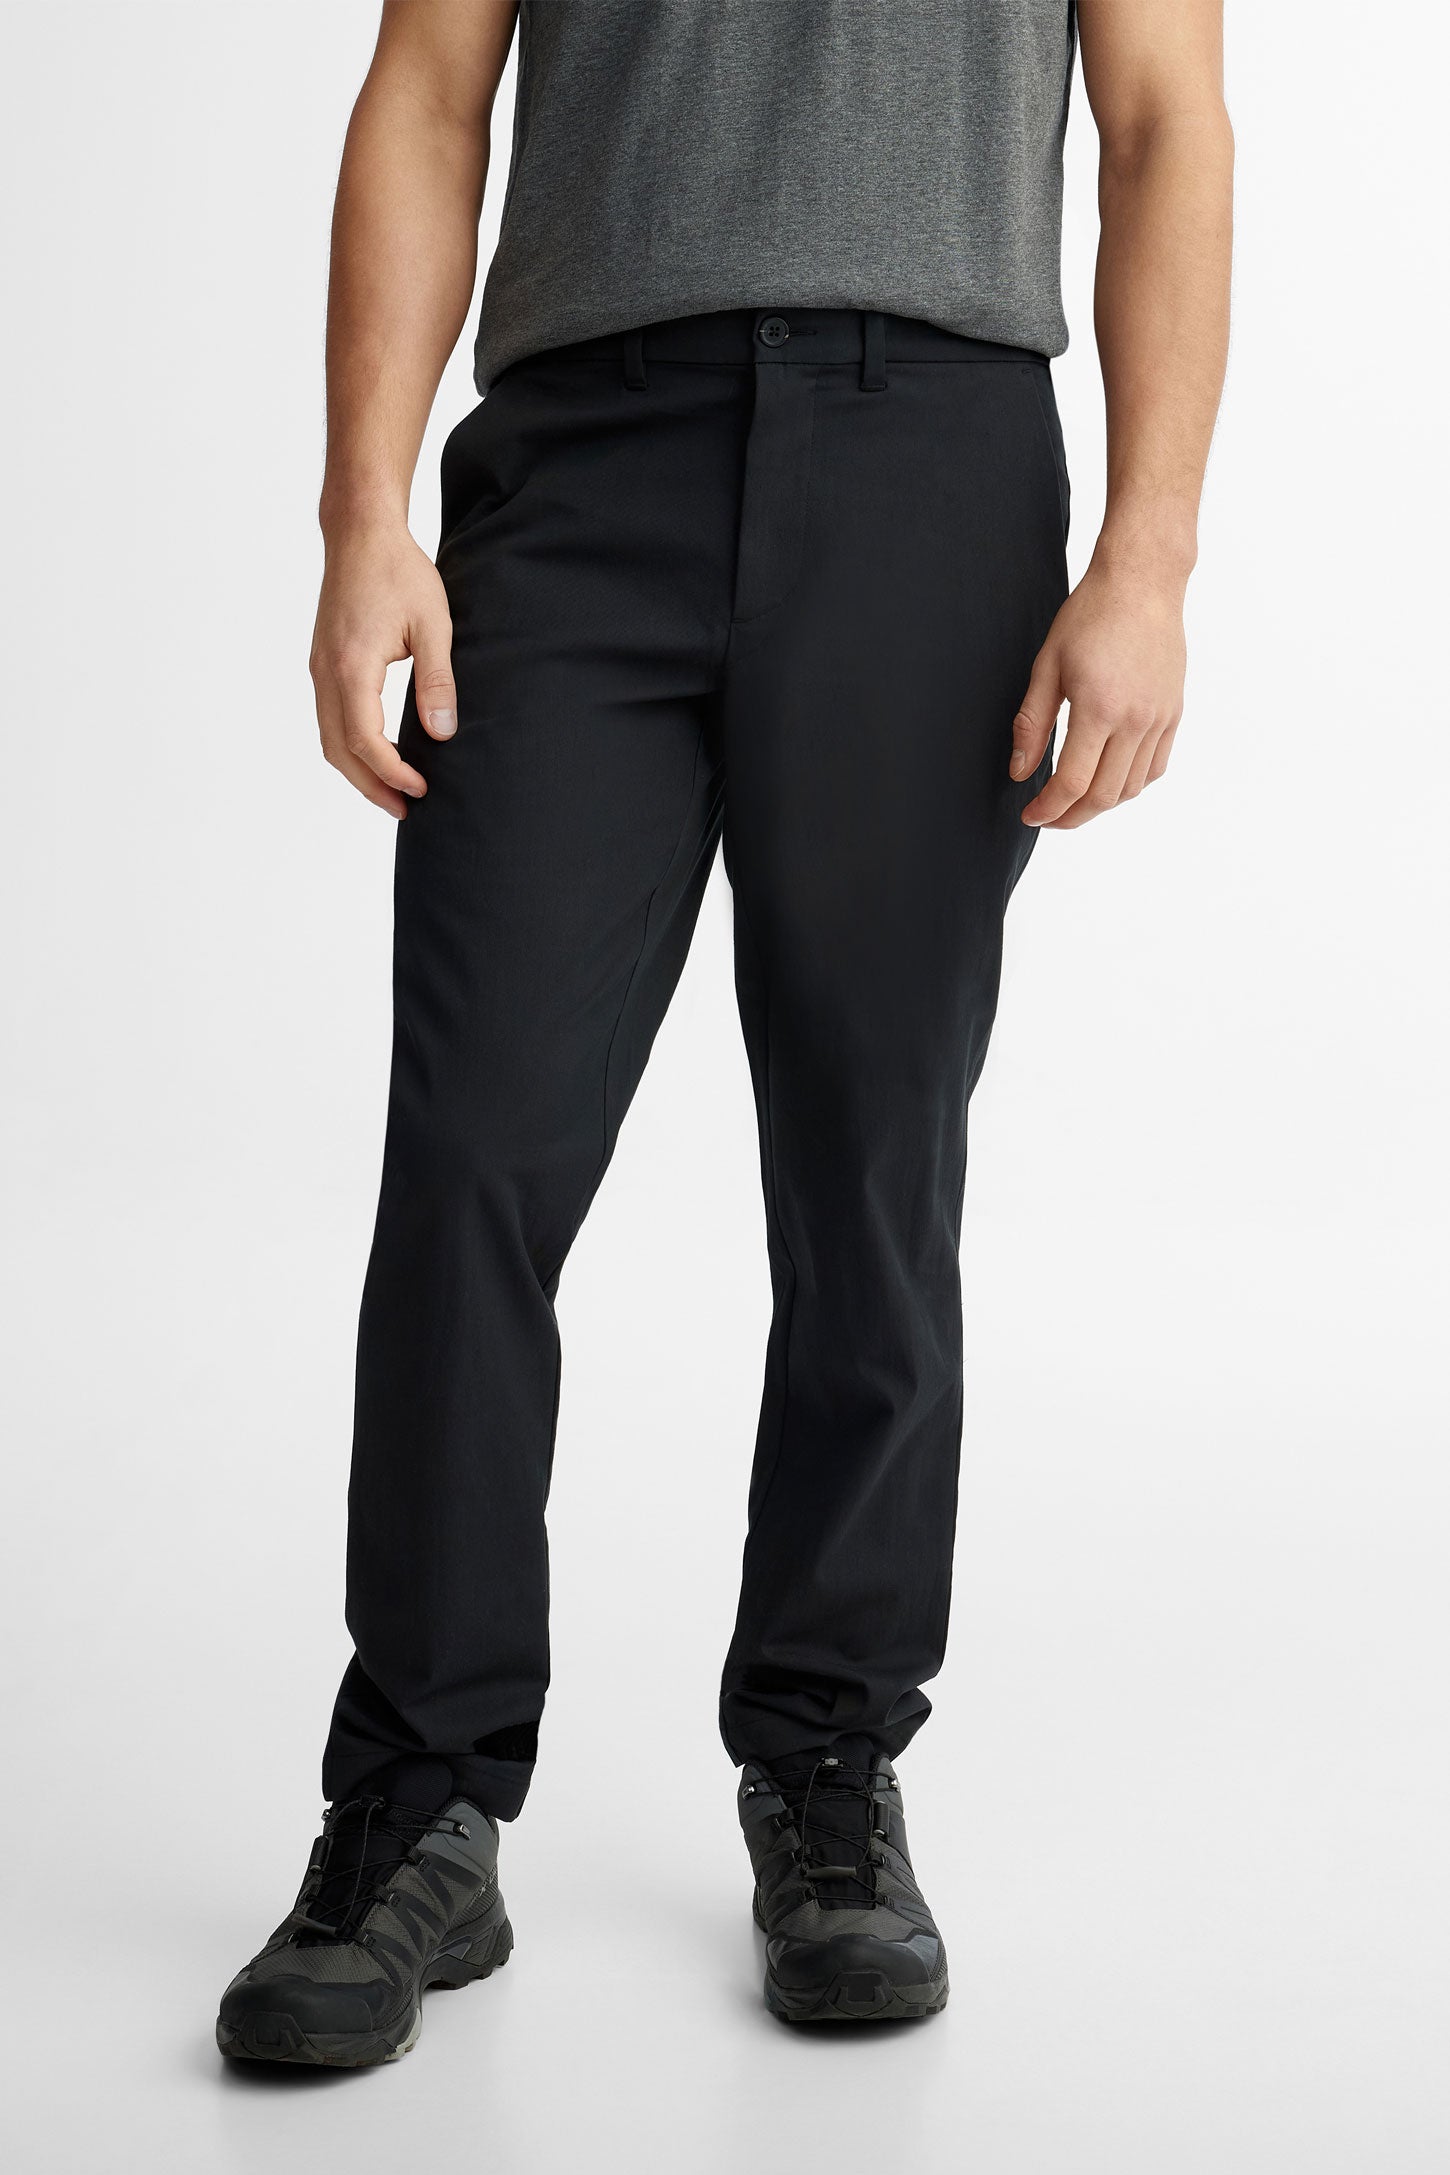 Men's 2-Pack Classic Cotton Stretch Twill Jogger Pants at Amazon Men's  Clothing store